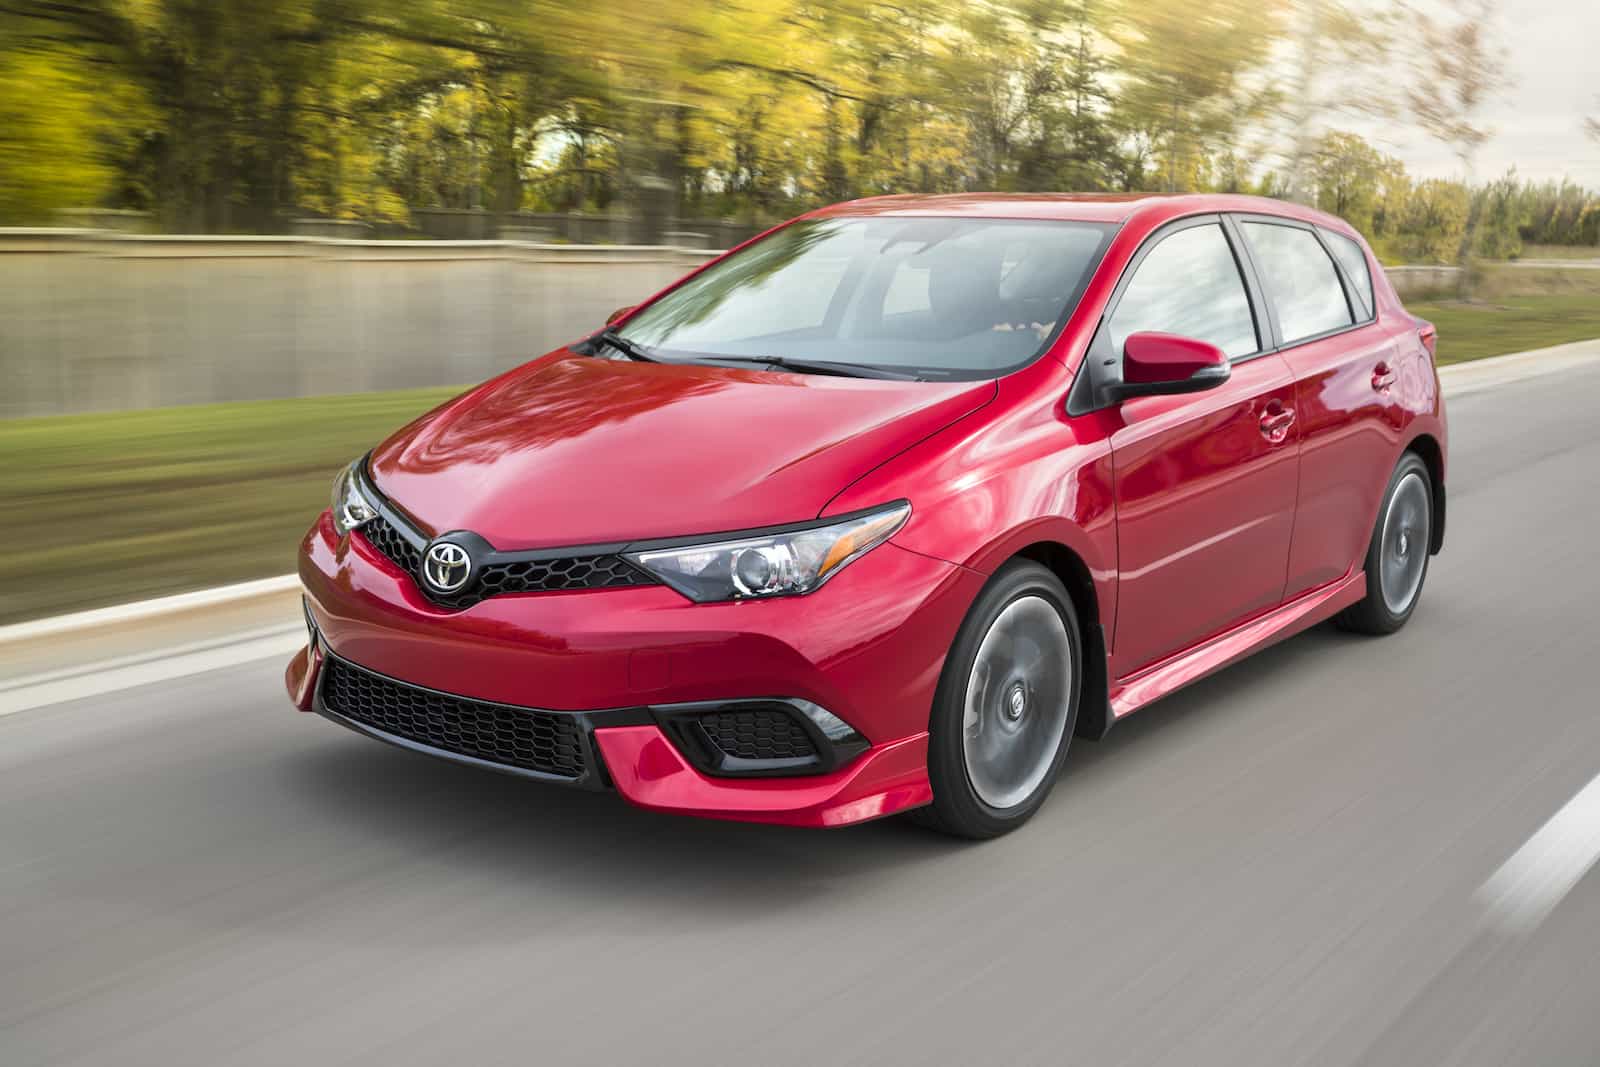 2017 Toyota Corolla iM Review | TractionLife